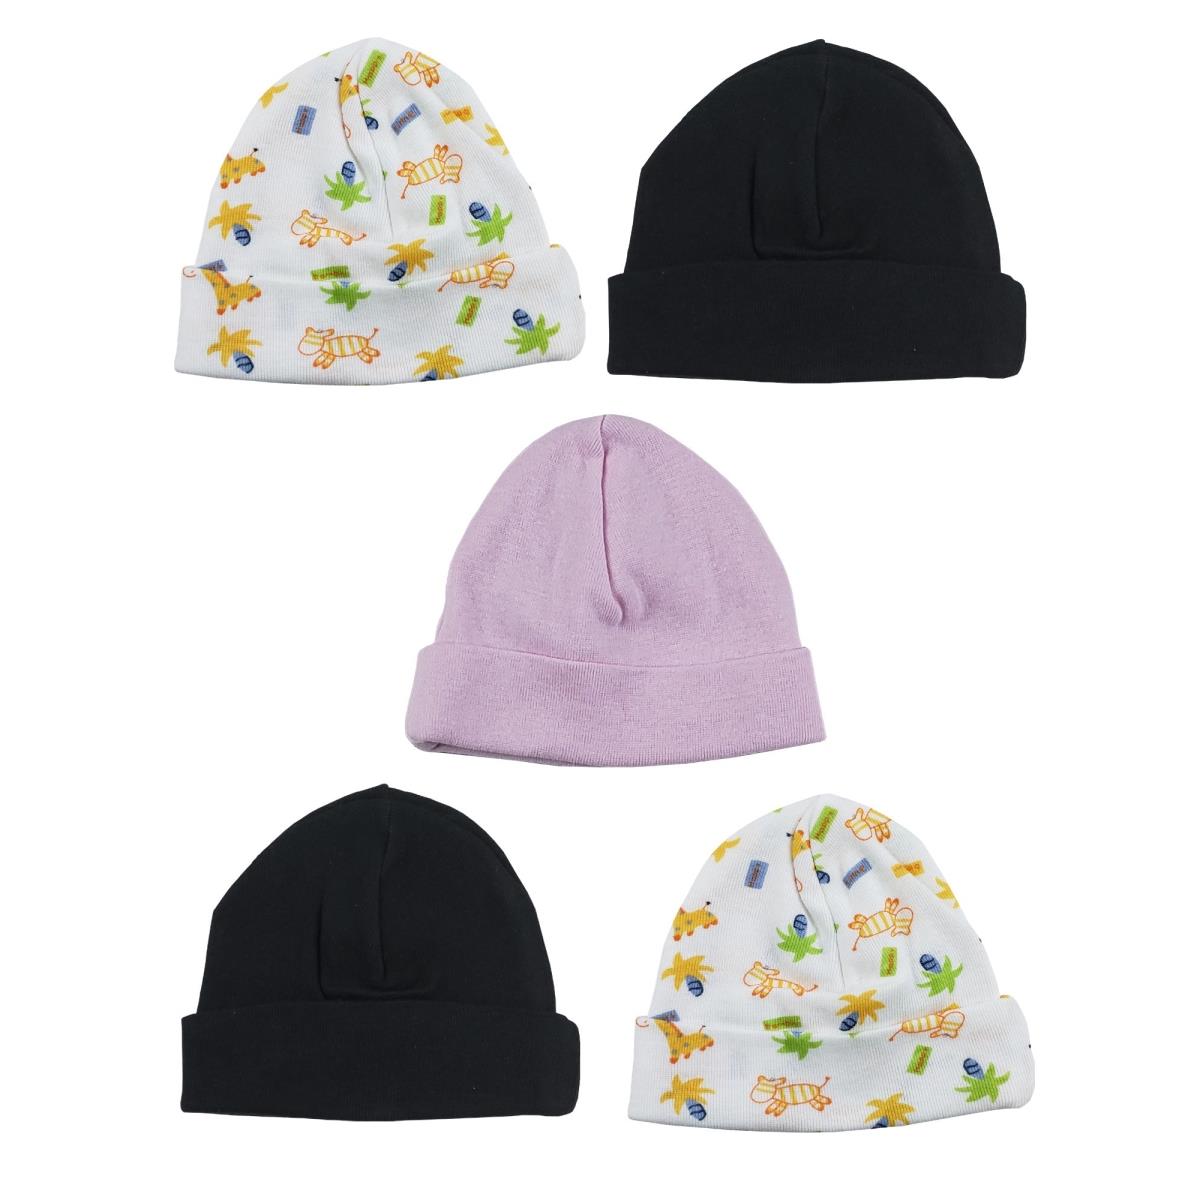 Picture of Bambini LS-0339 Girls Baby Cap - Pink&#44; Black & Print - One Size - 5 per Pack